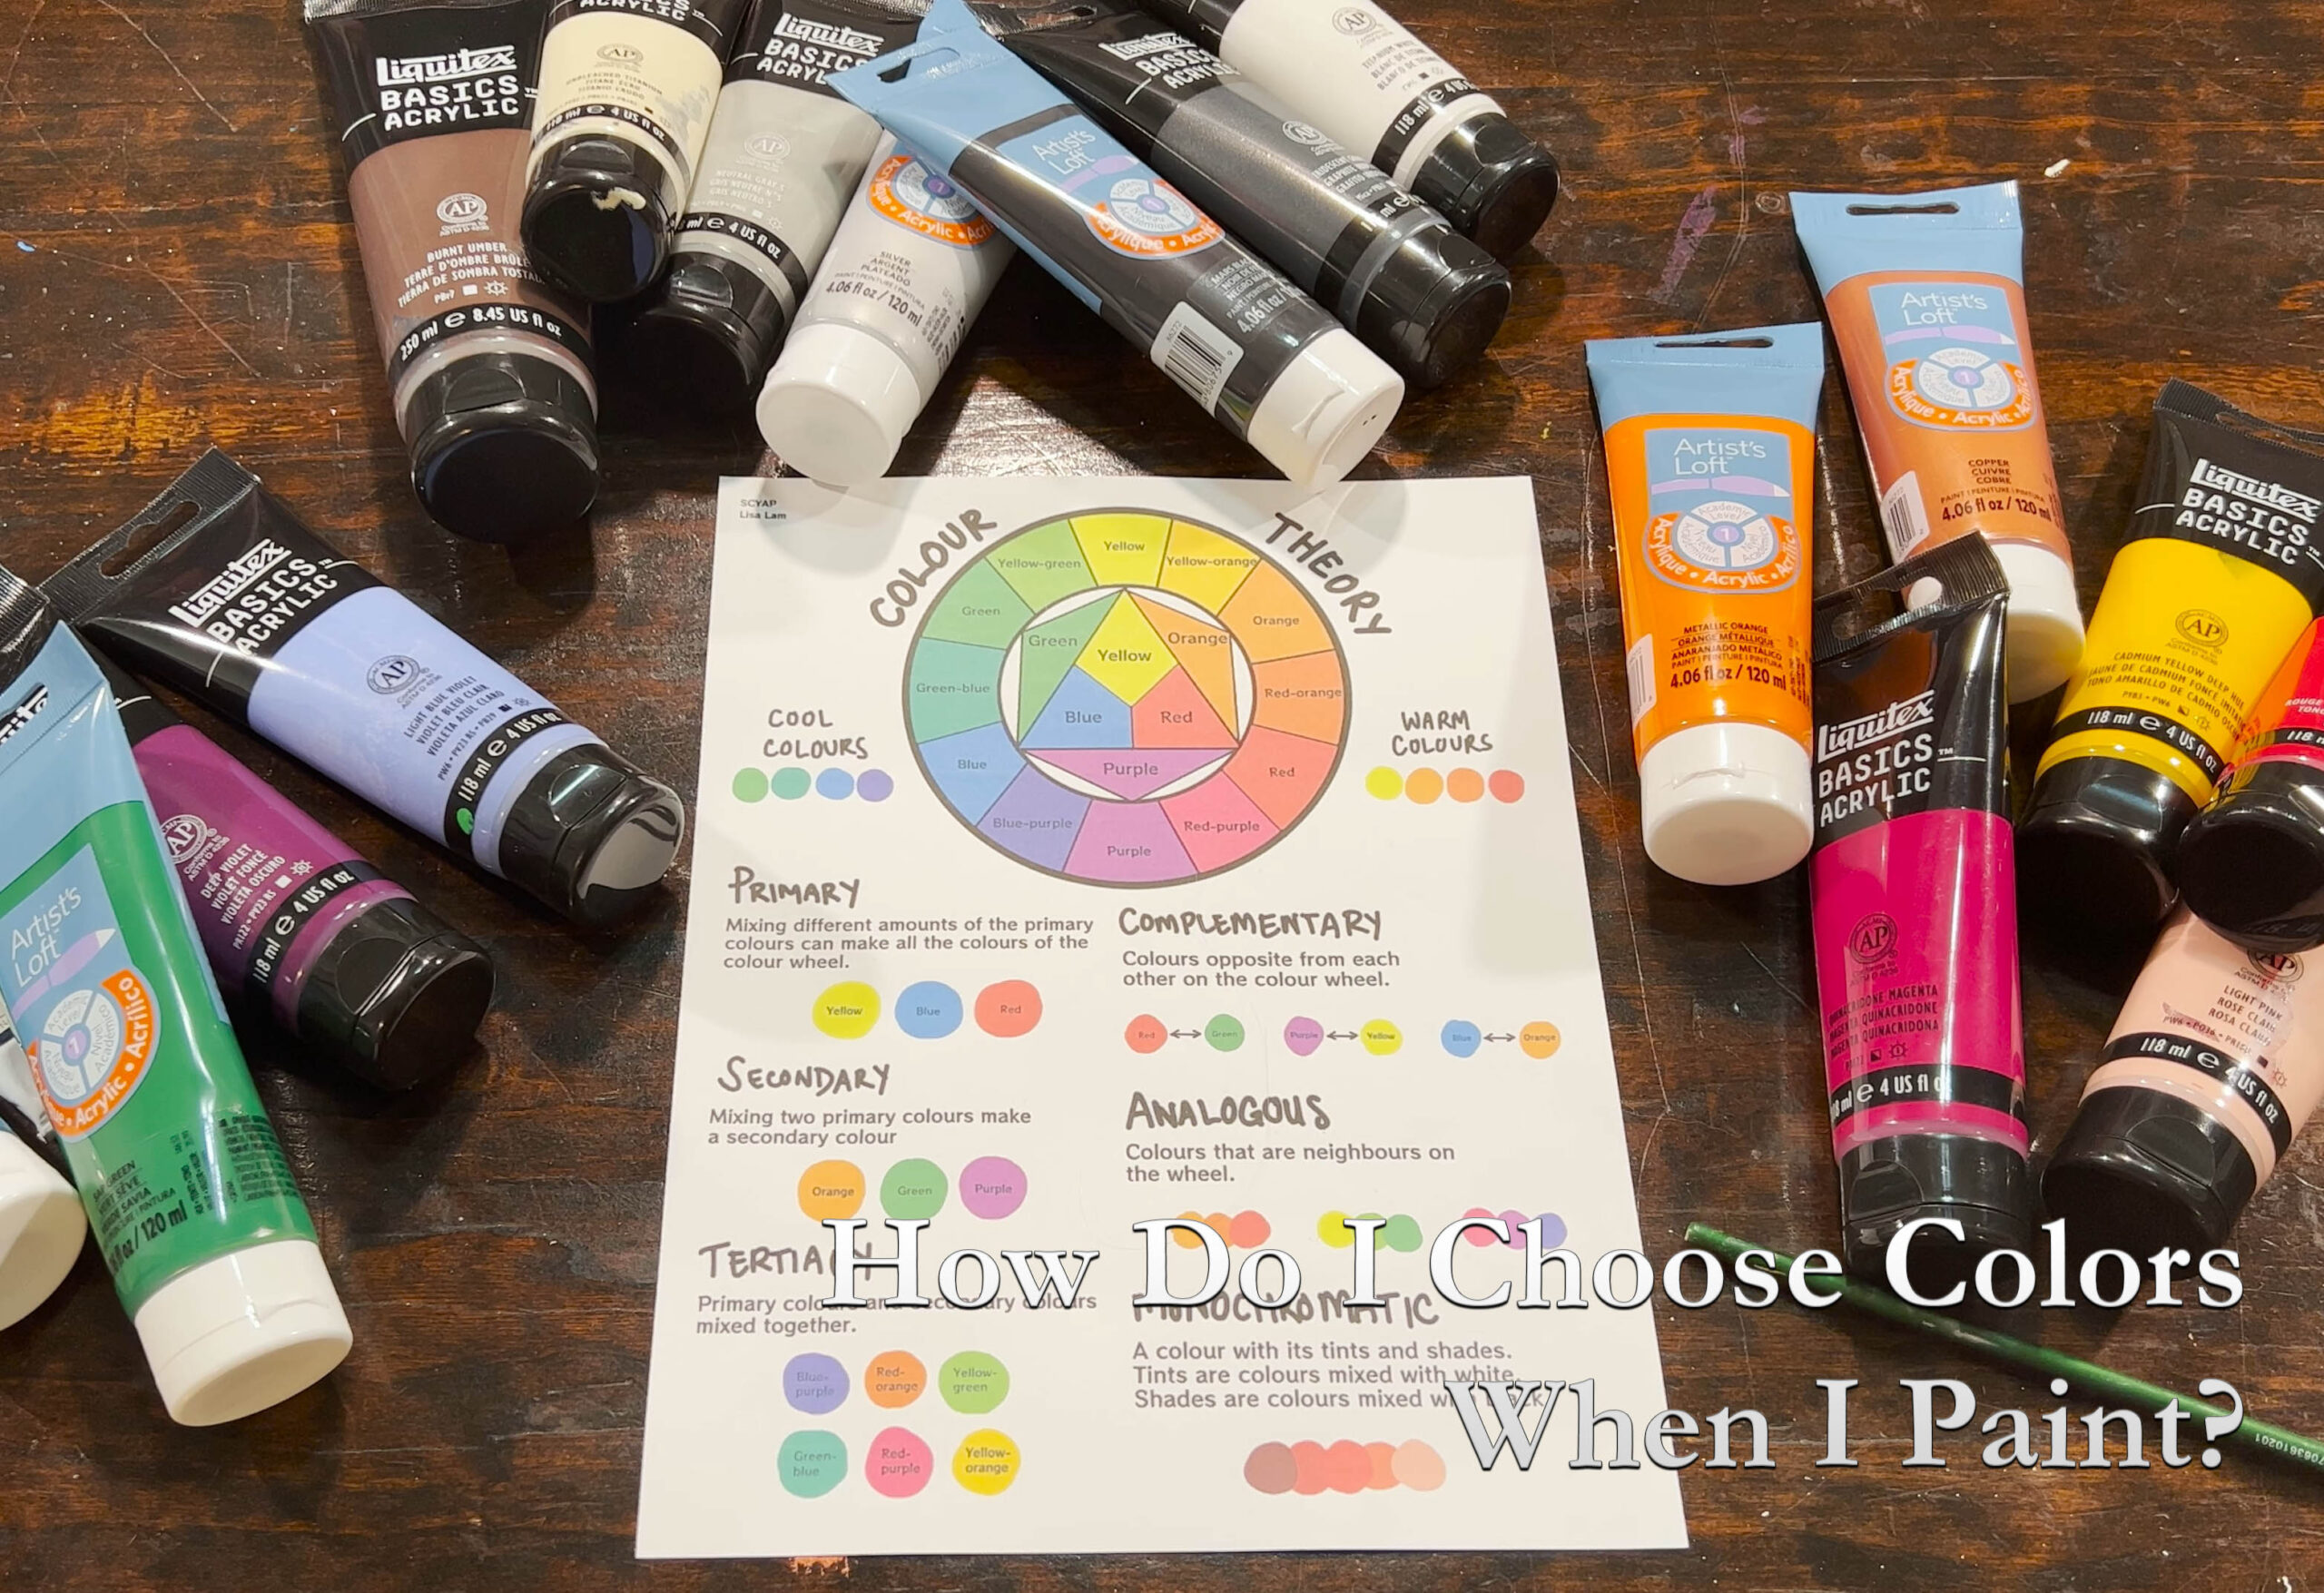 How Do I Choose Paint Colors When I Start a New Painting by Dawn M. Wayand